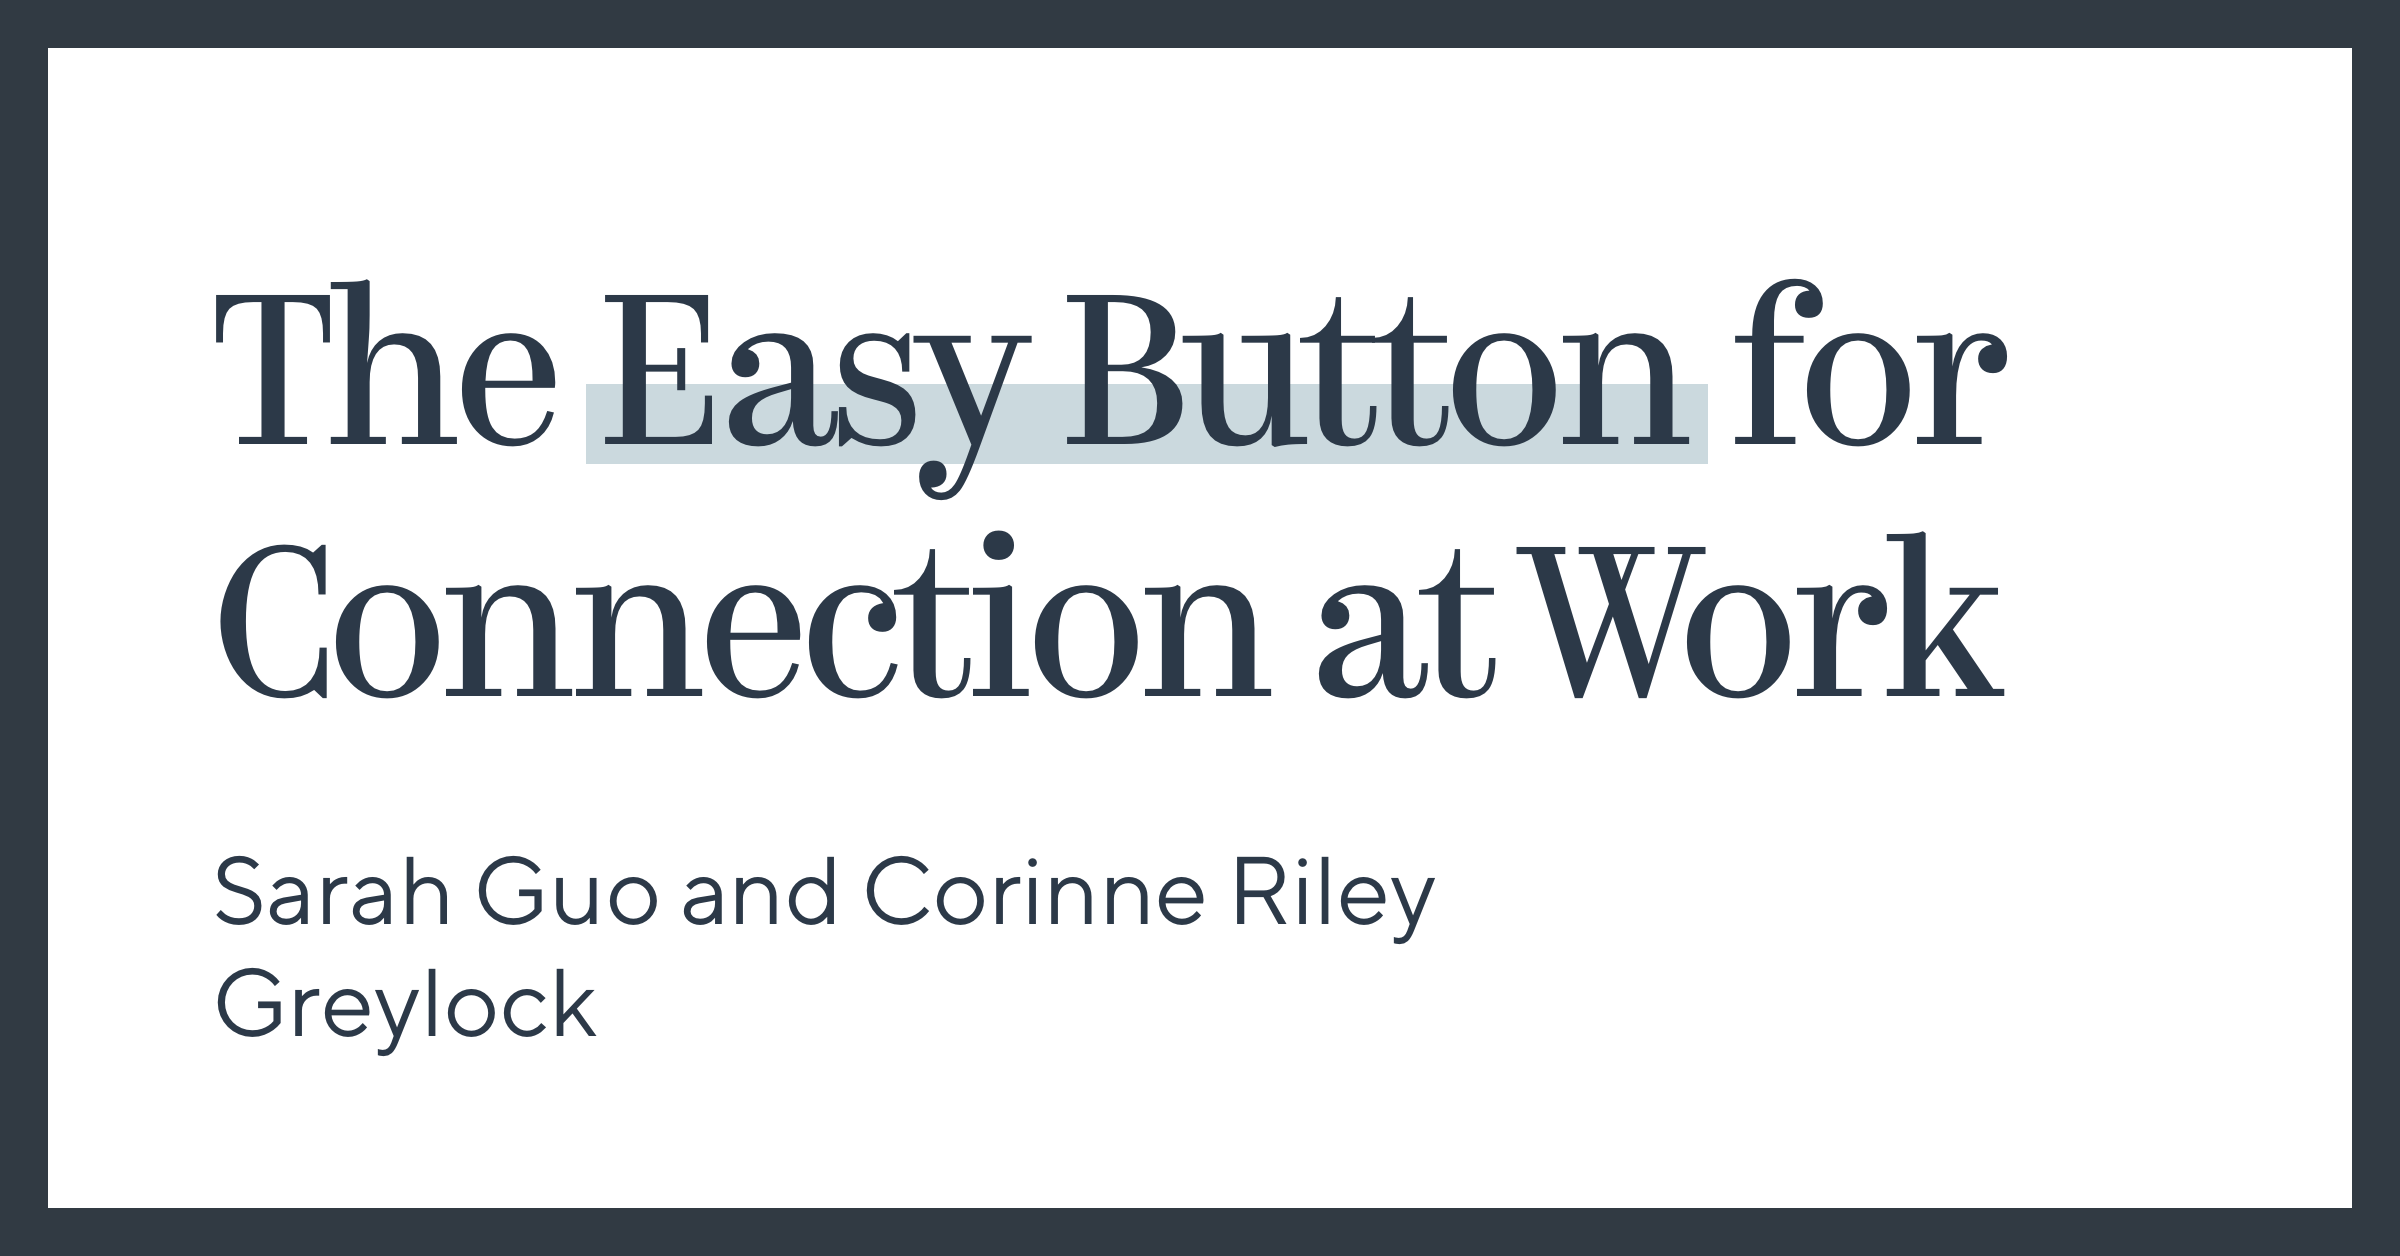 The Easy Button for Connection at Work